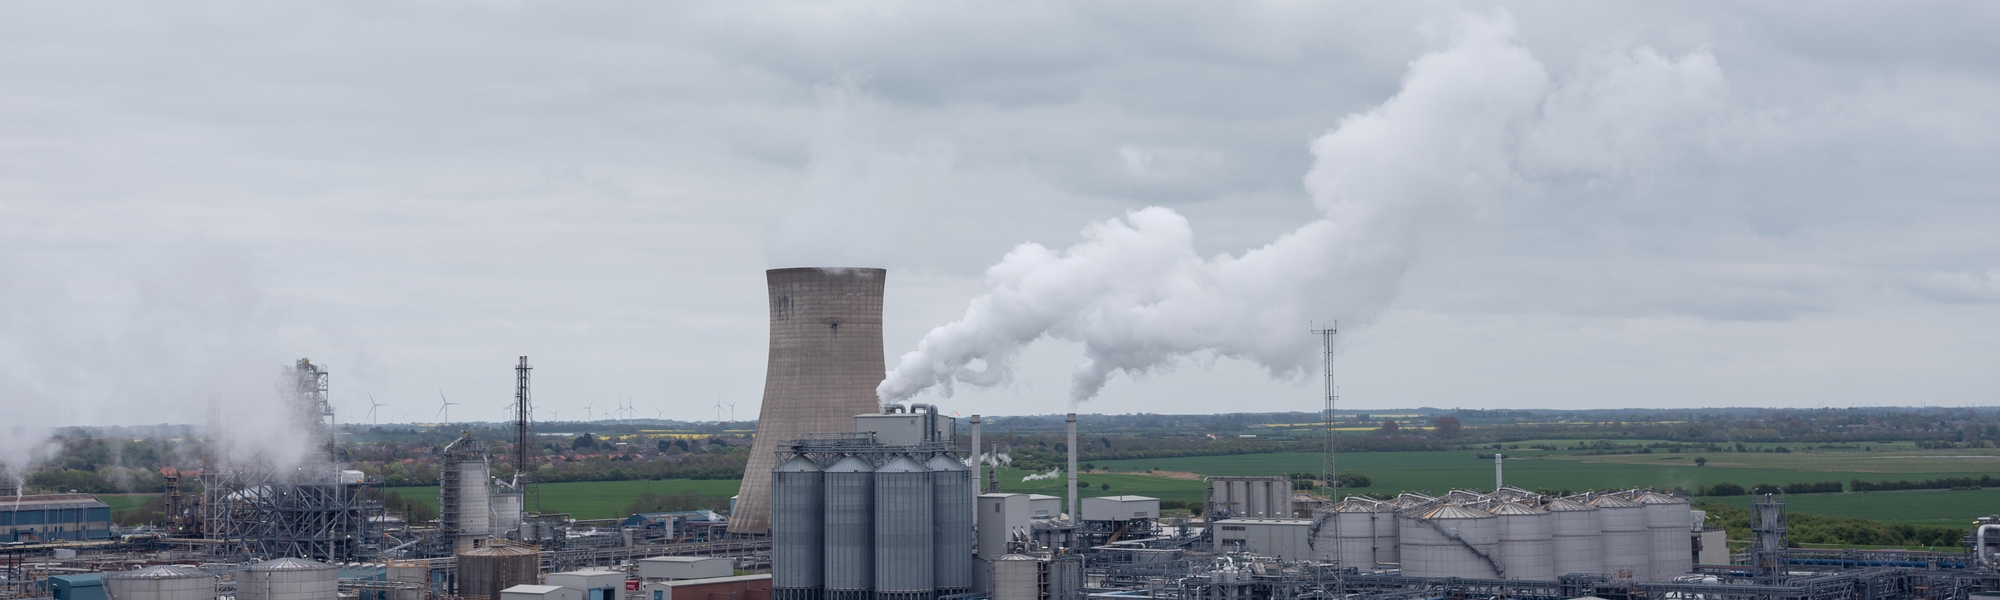 One of the UK's biggest emission points is in Humber, a large industrial area outside Hull. 